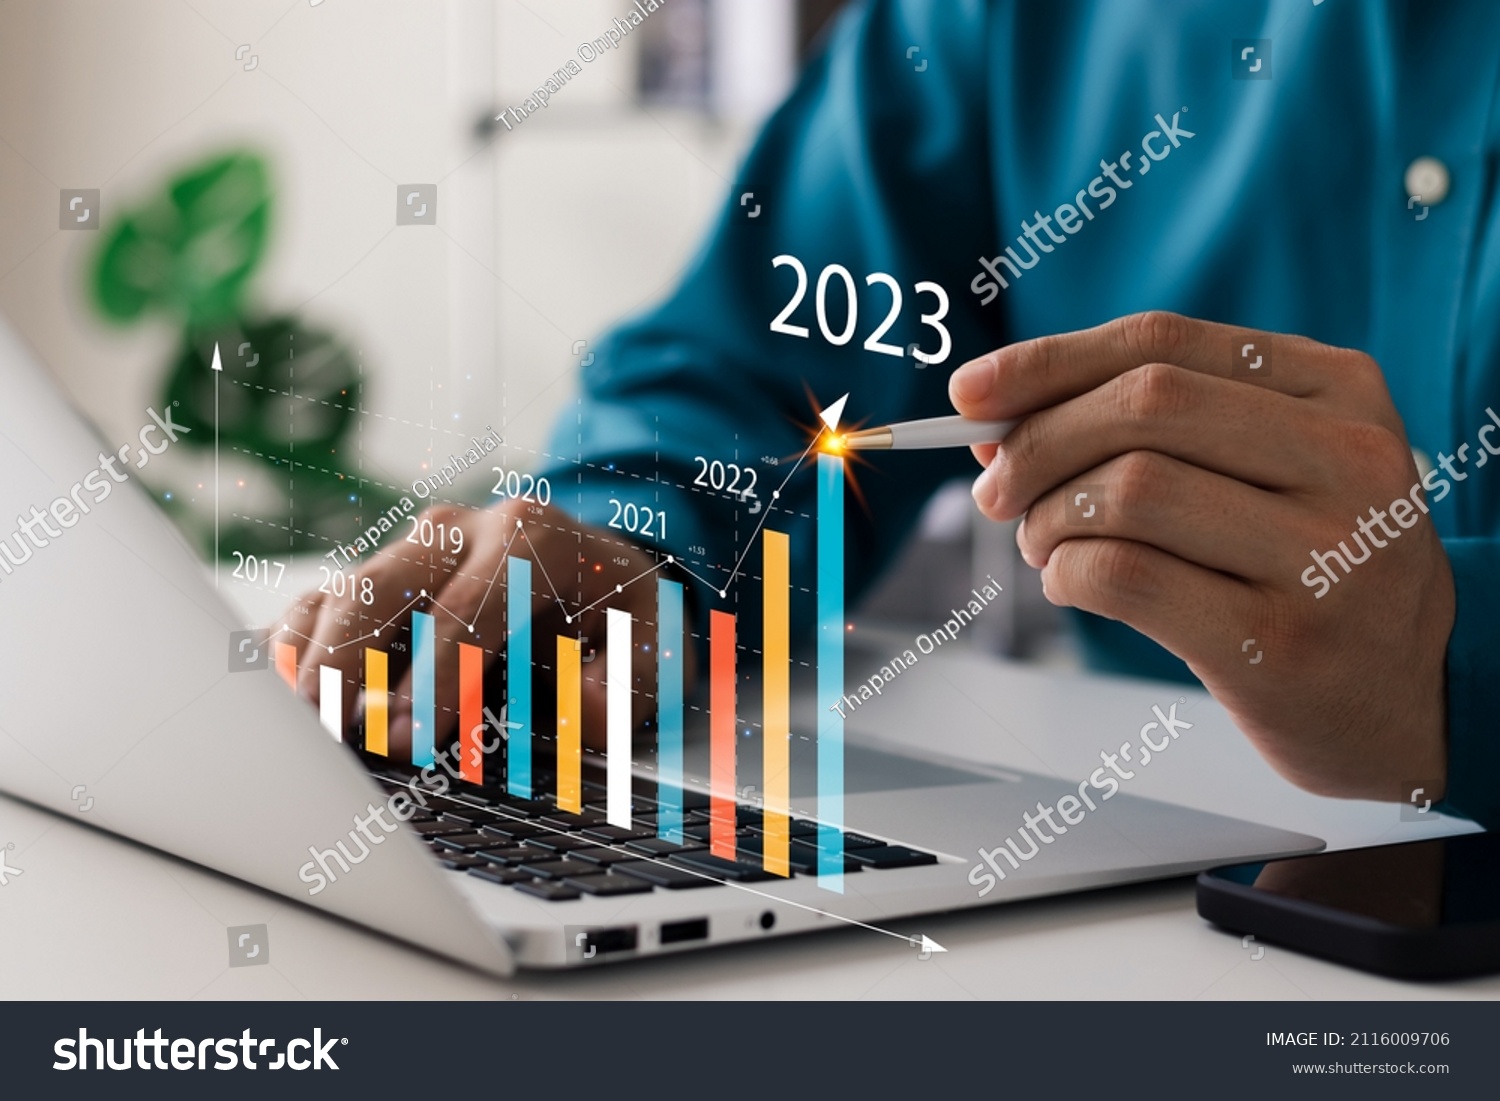 Businessman analyzes profitability of working companies with digital augmented reality graphics, positive indicators in 2023, businessman calculates financial data for long-term investments. #2116009706